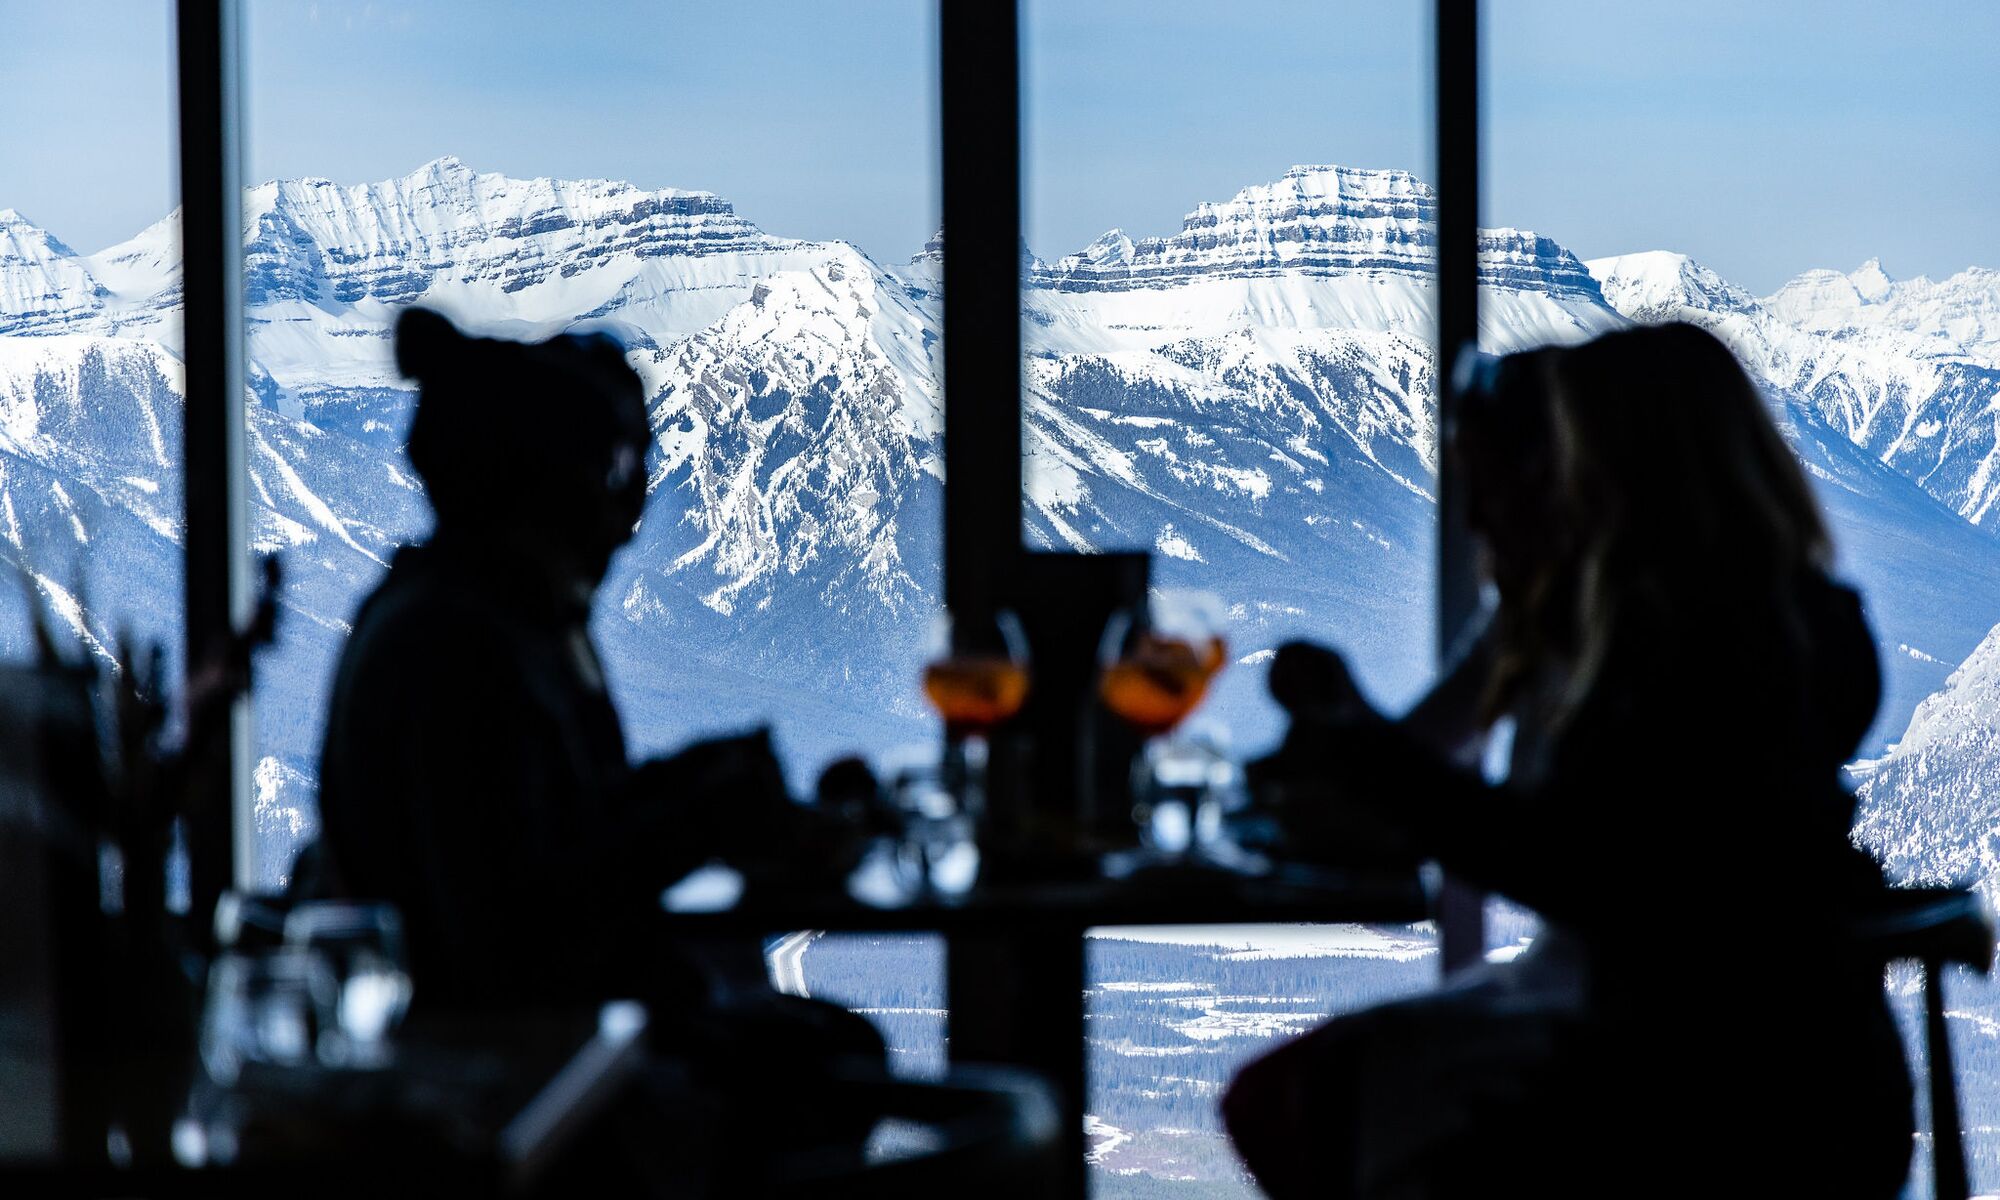 Four people dine with the Sundance Mountain Range behind them out of a window at the Banff Gondola in Banff National Park.